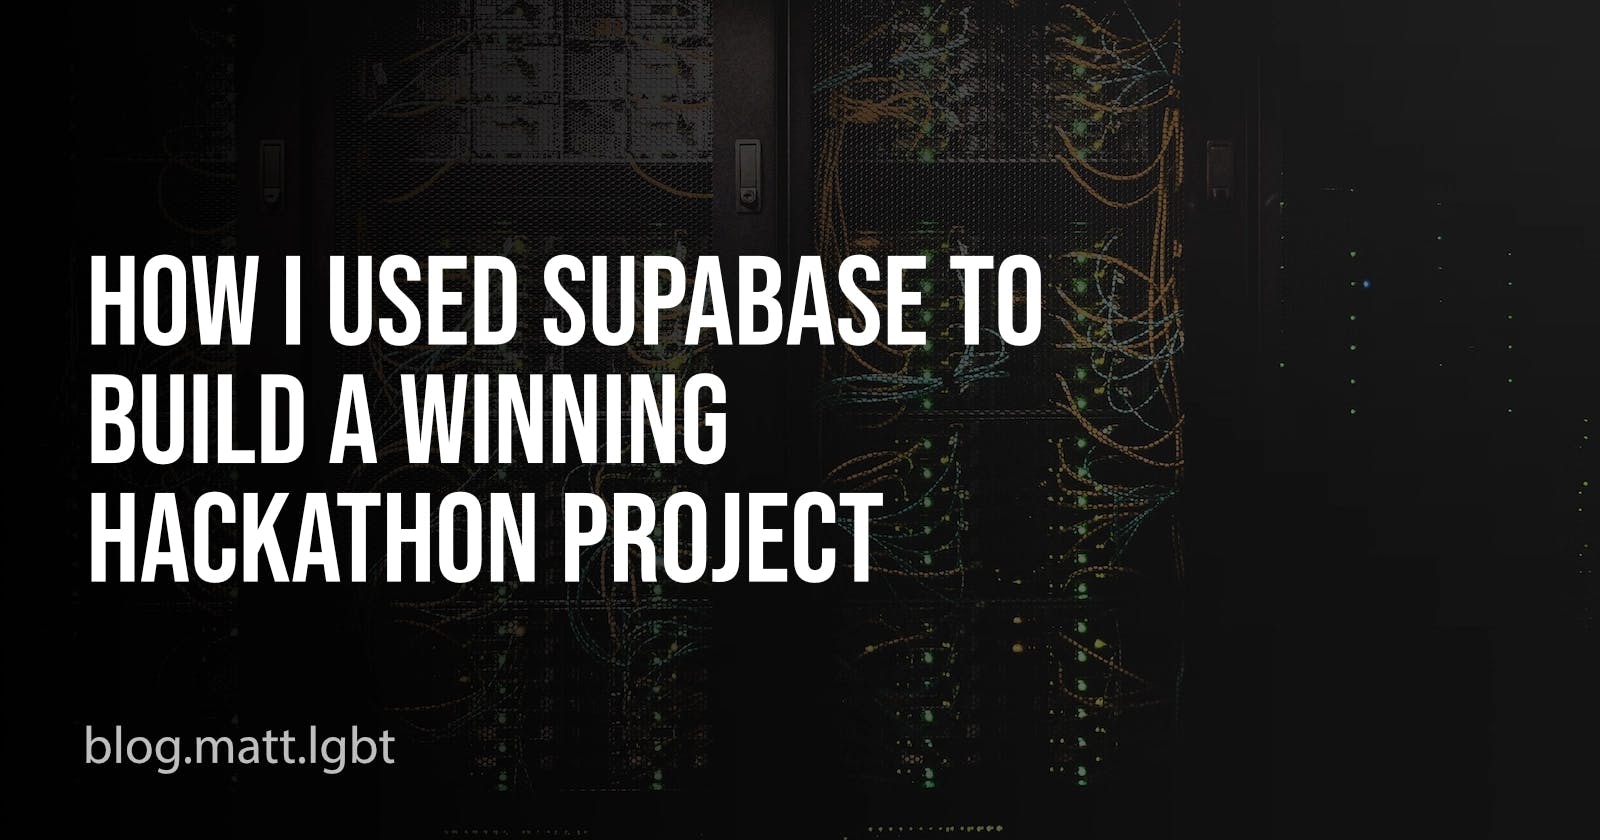 How I used Supabase to build a winning hackathon project